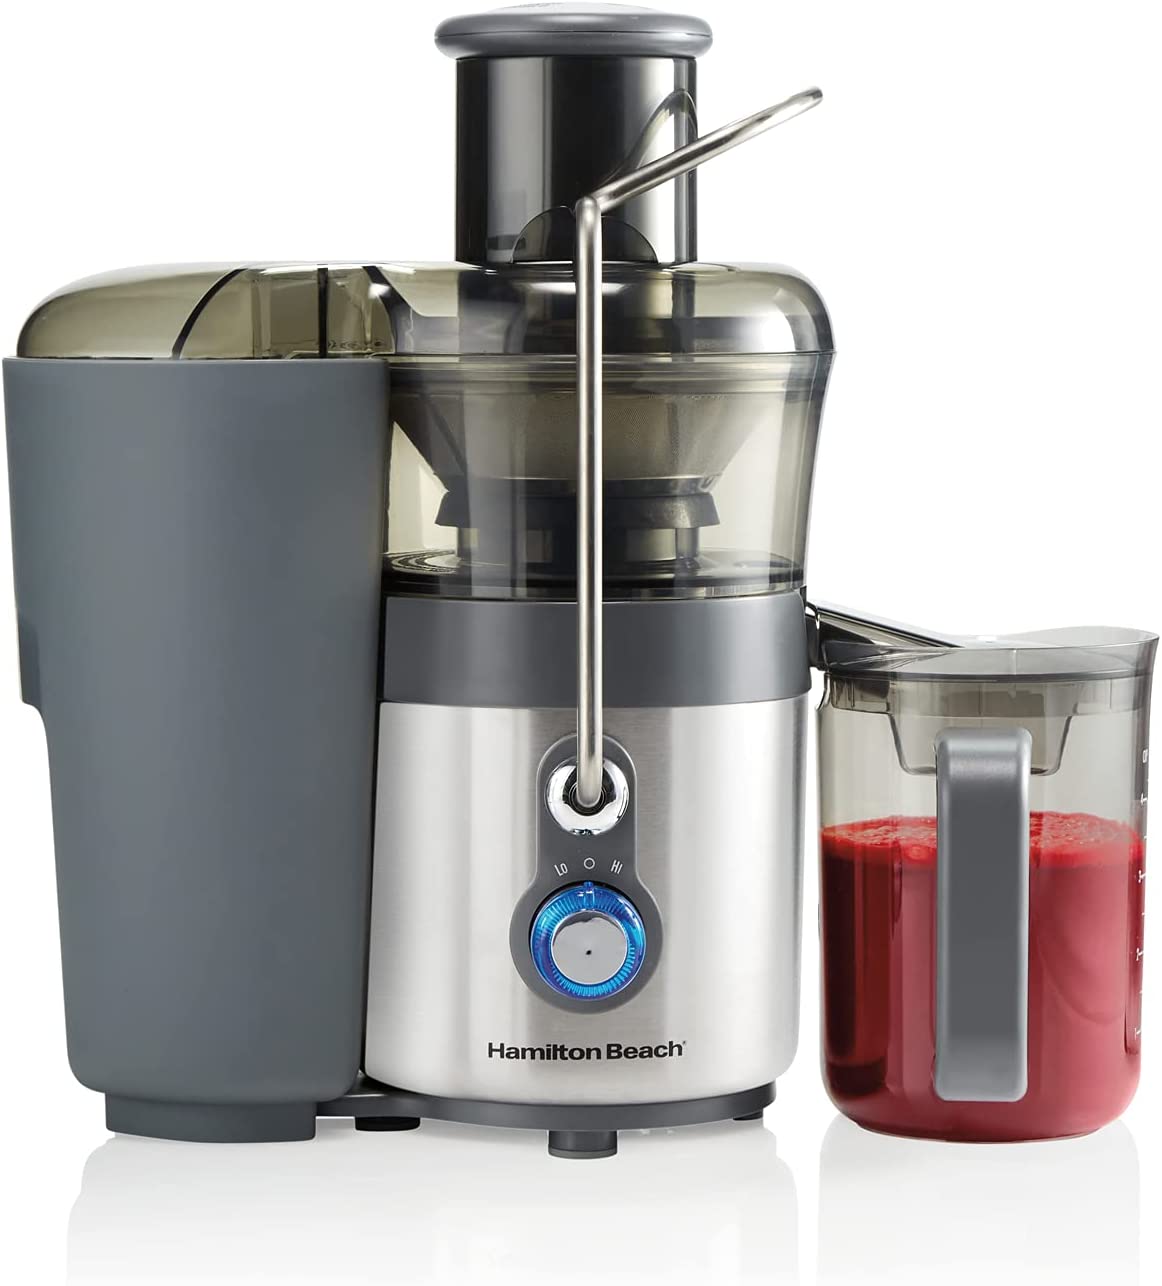 10 Best Juicers for Greens, Fruits, and More